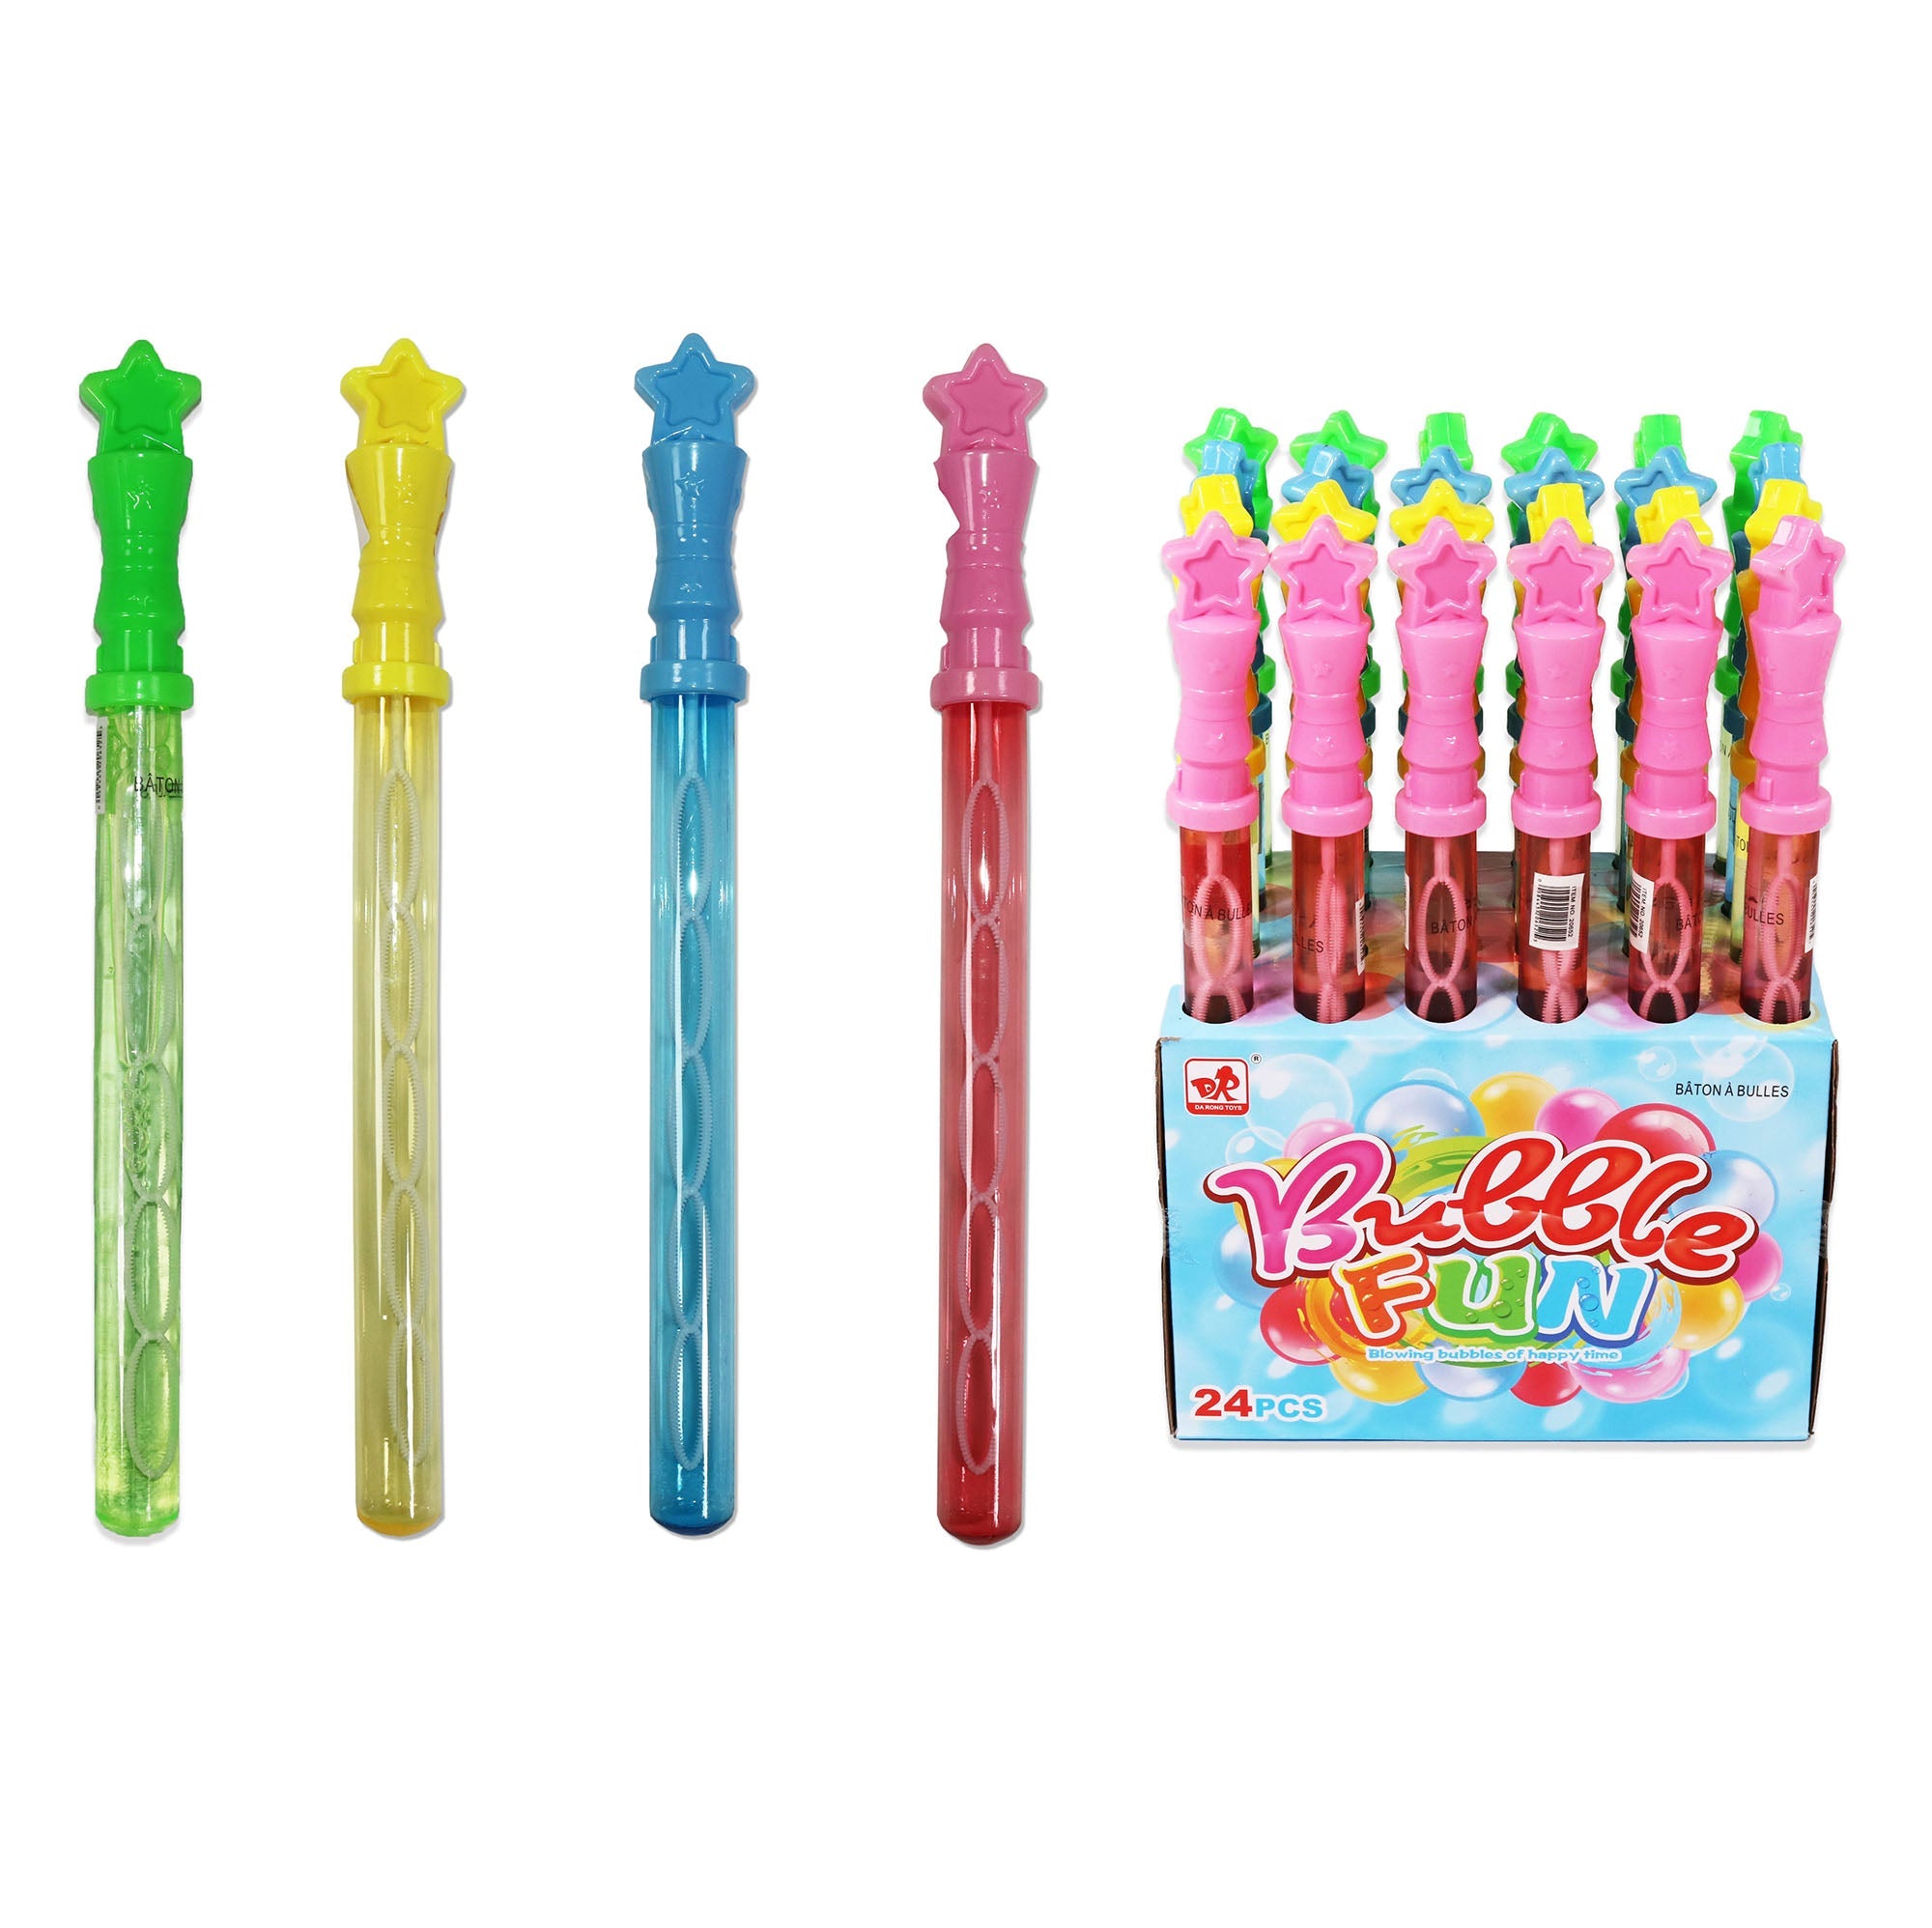 Star Bubble Wand 15in